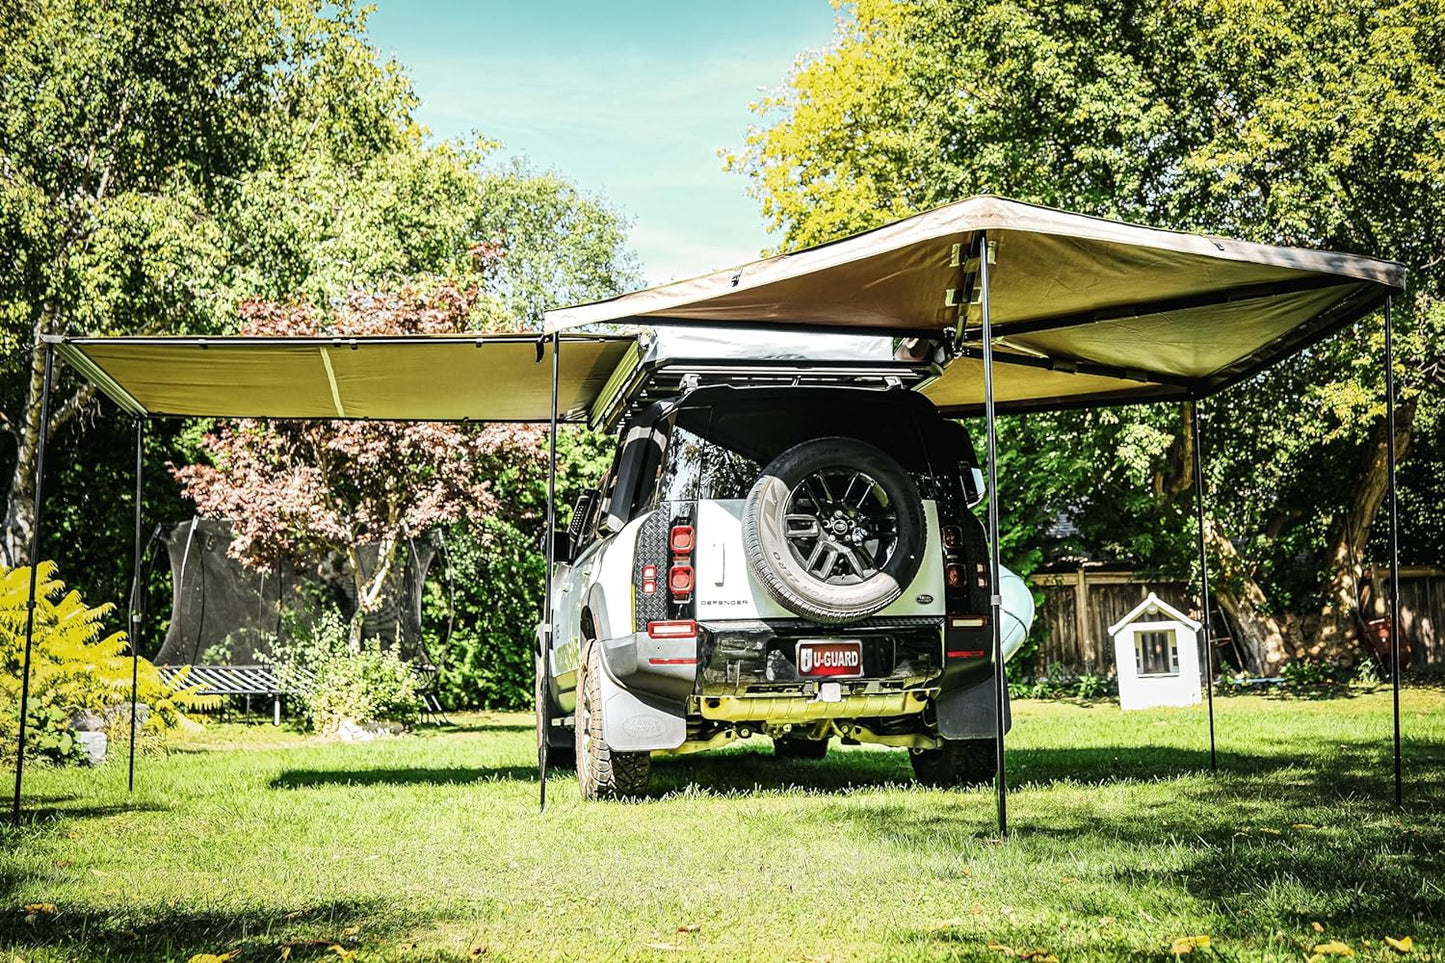 U-GUARD Waterproof Rooftop Side Mount Pullout Awning, Overland Series Retractable Vehicle Awning, SUV Truck Awning Shelter Tent, Gray Pullout Awning 2m x 2m (6.5ft x 6.5ft)